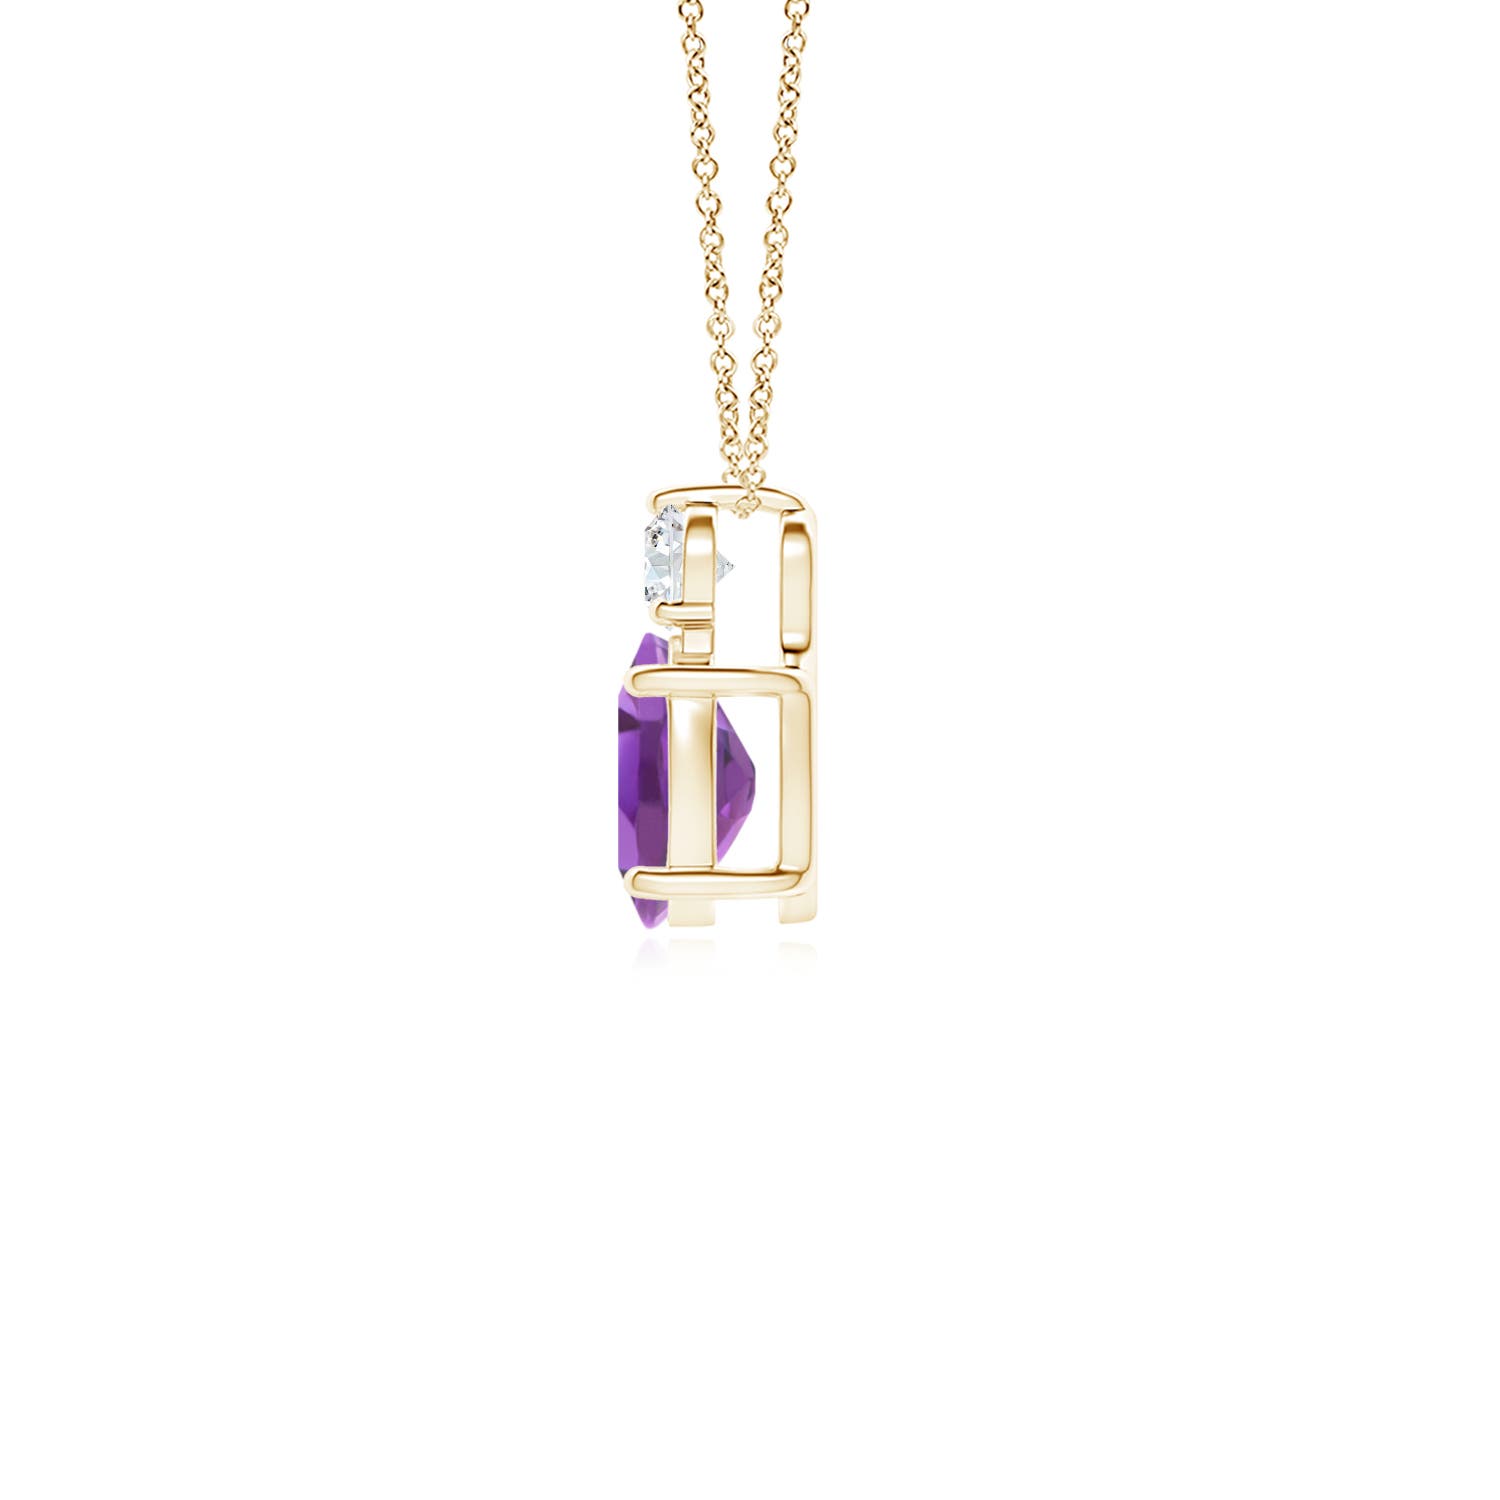 A - Amethyst / 0.81 CT / 14 KT Yellow Gold